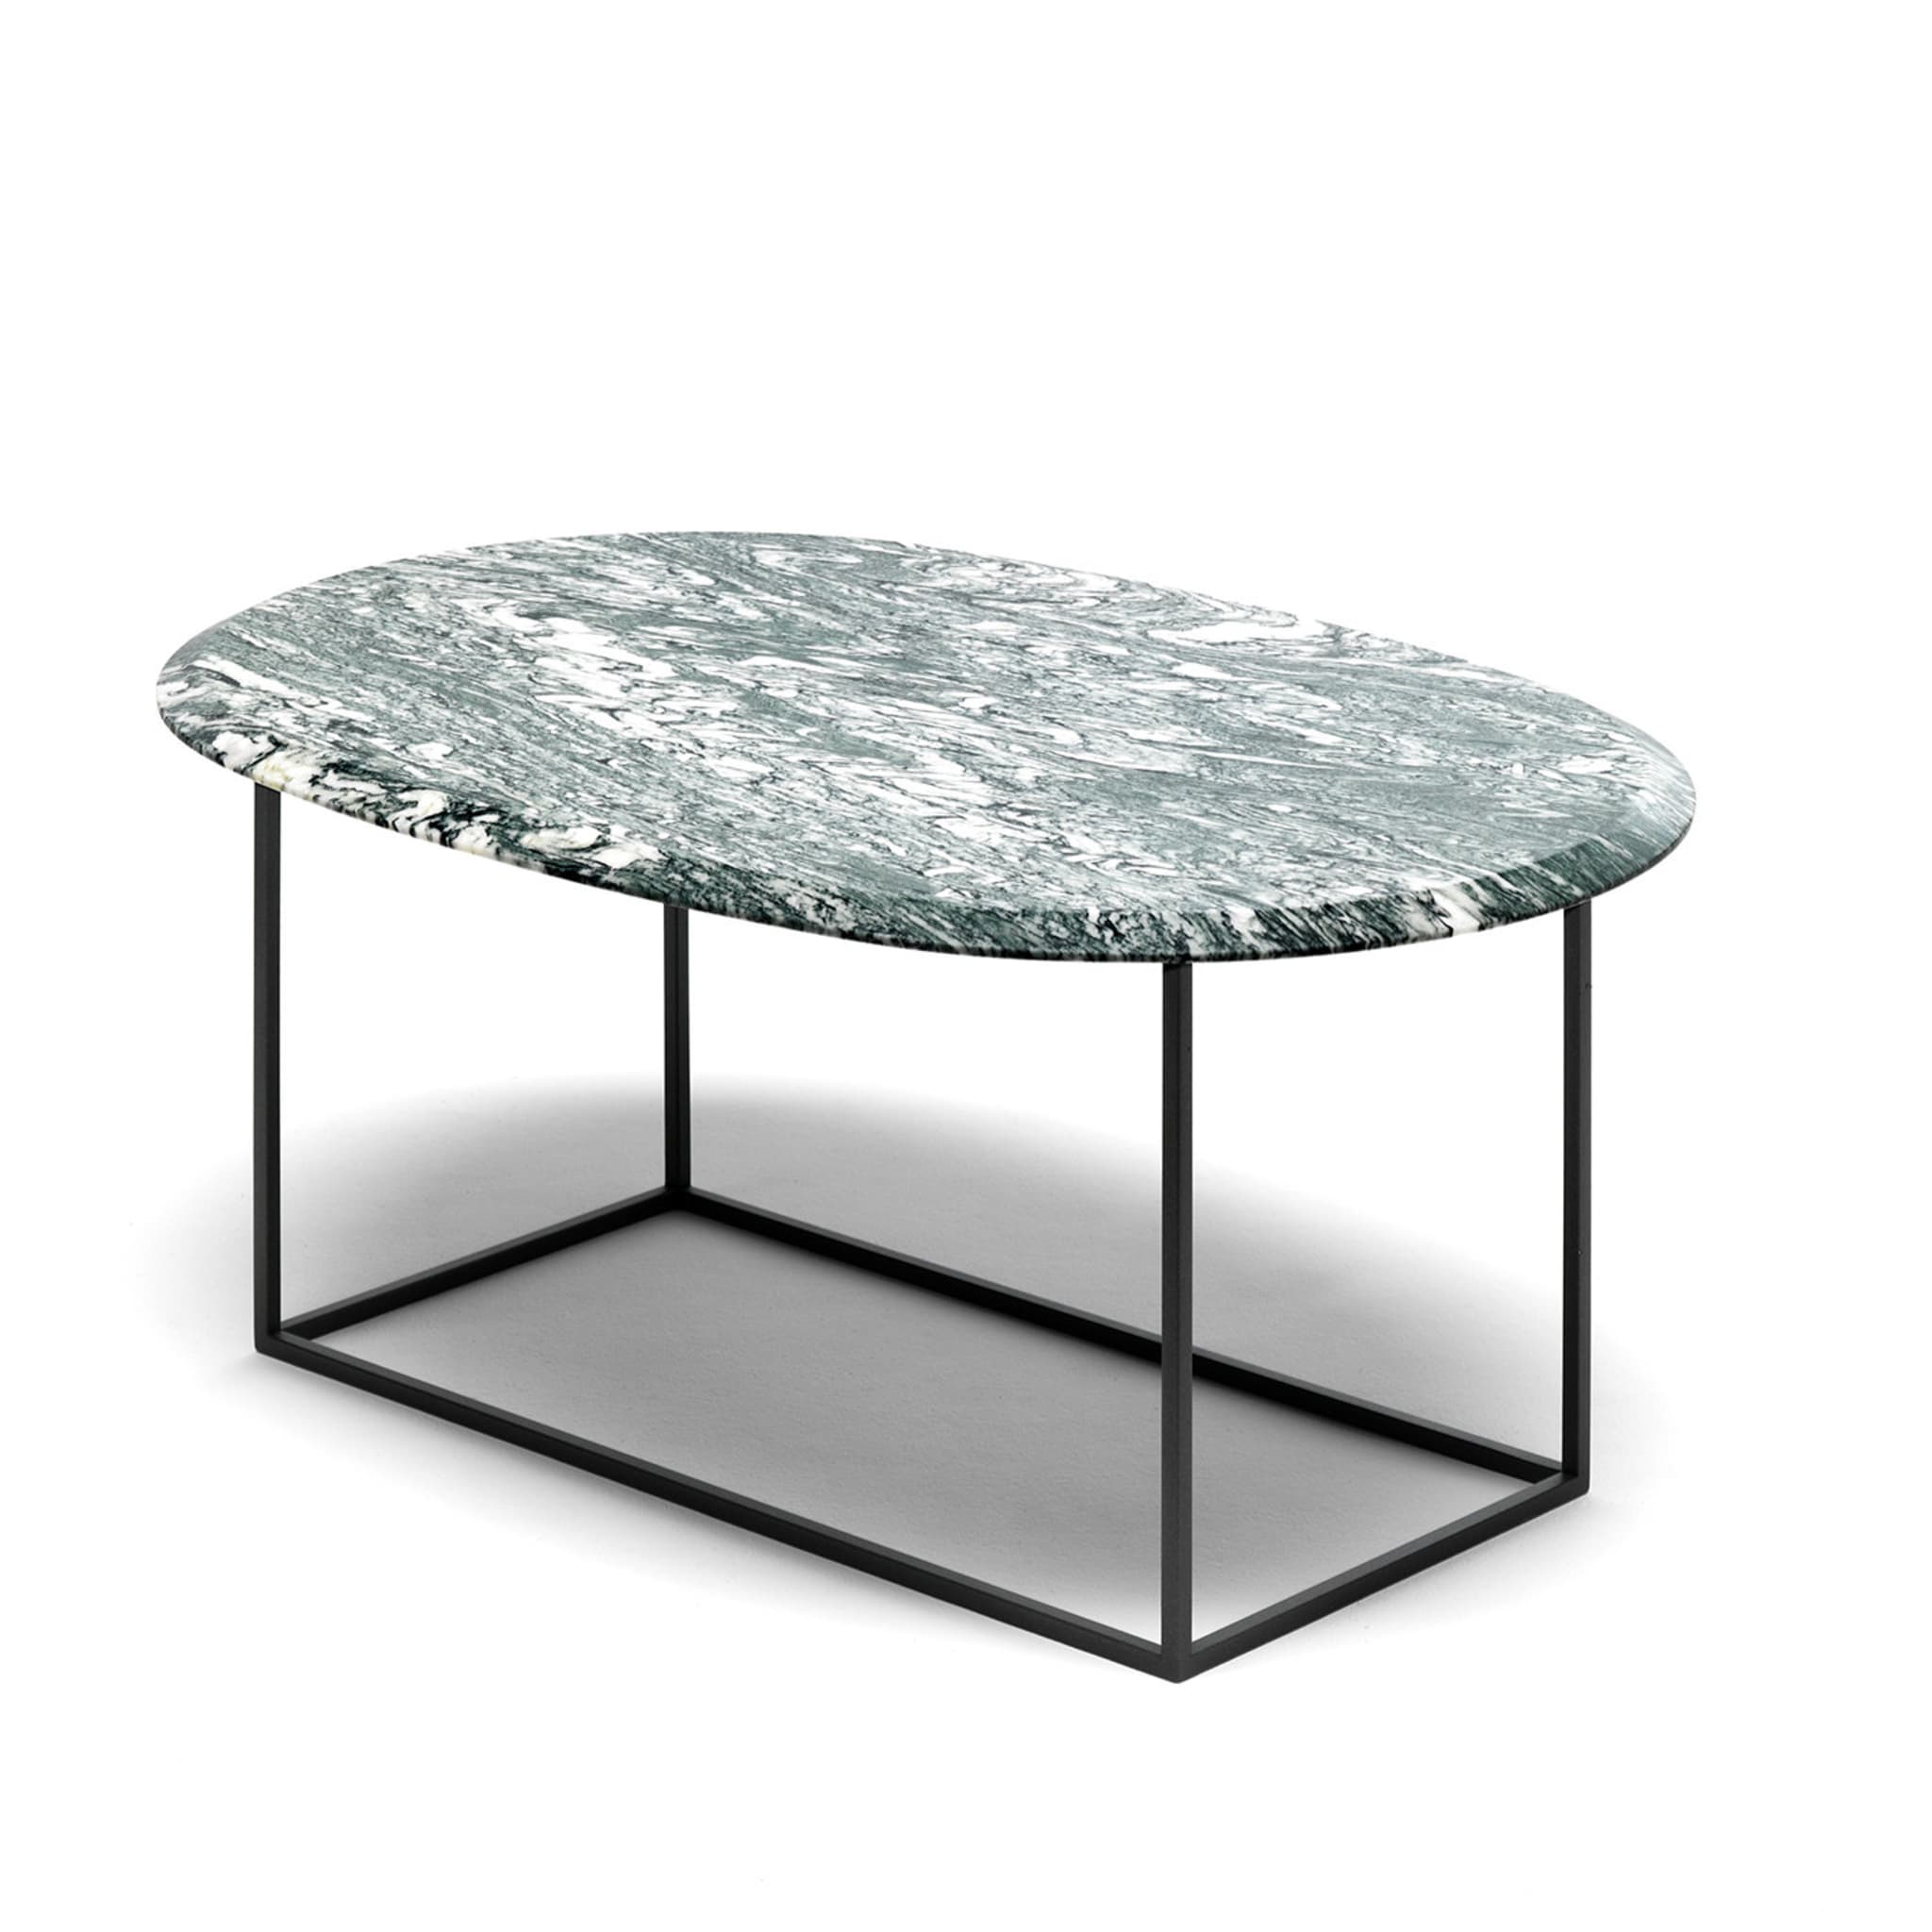 MT Low Coffee Table with Cipollino Marble Top - Alternative view 5